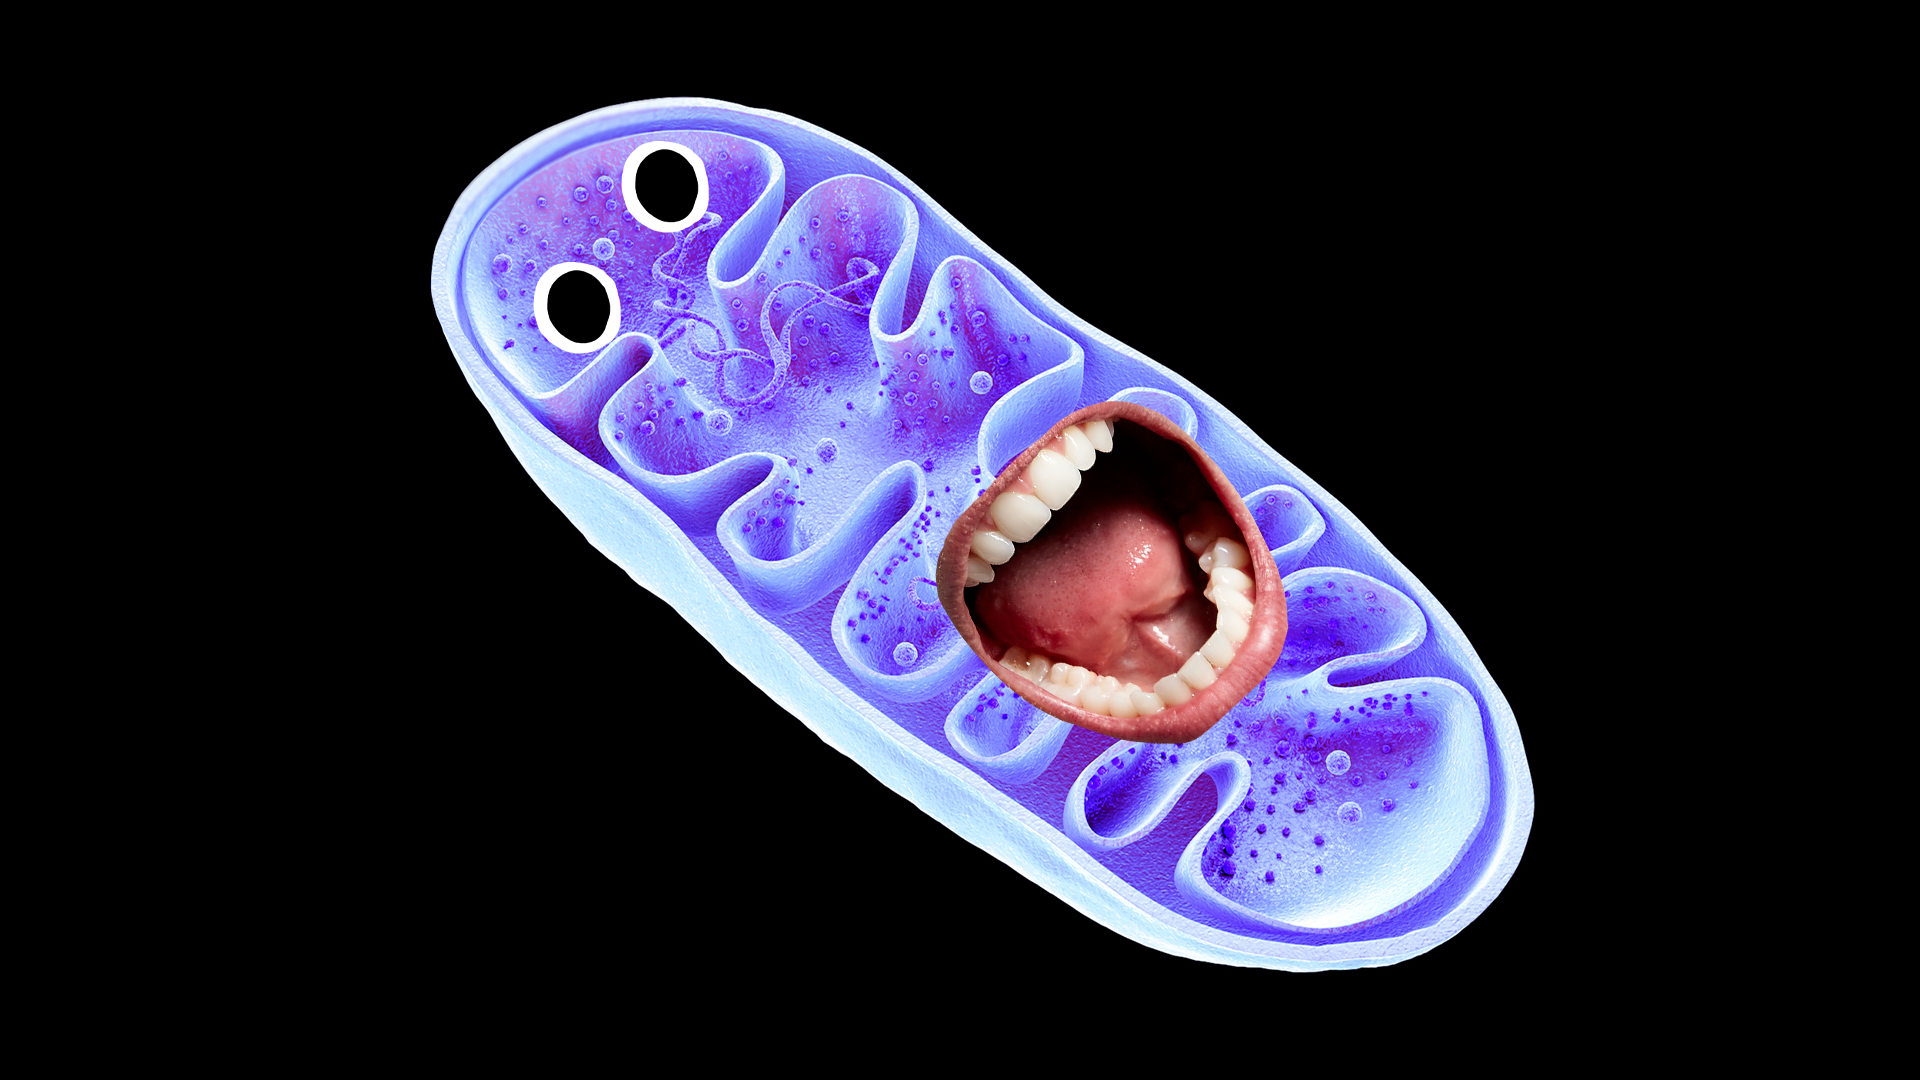 Mitochondria with goofy face on black background